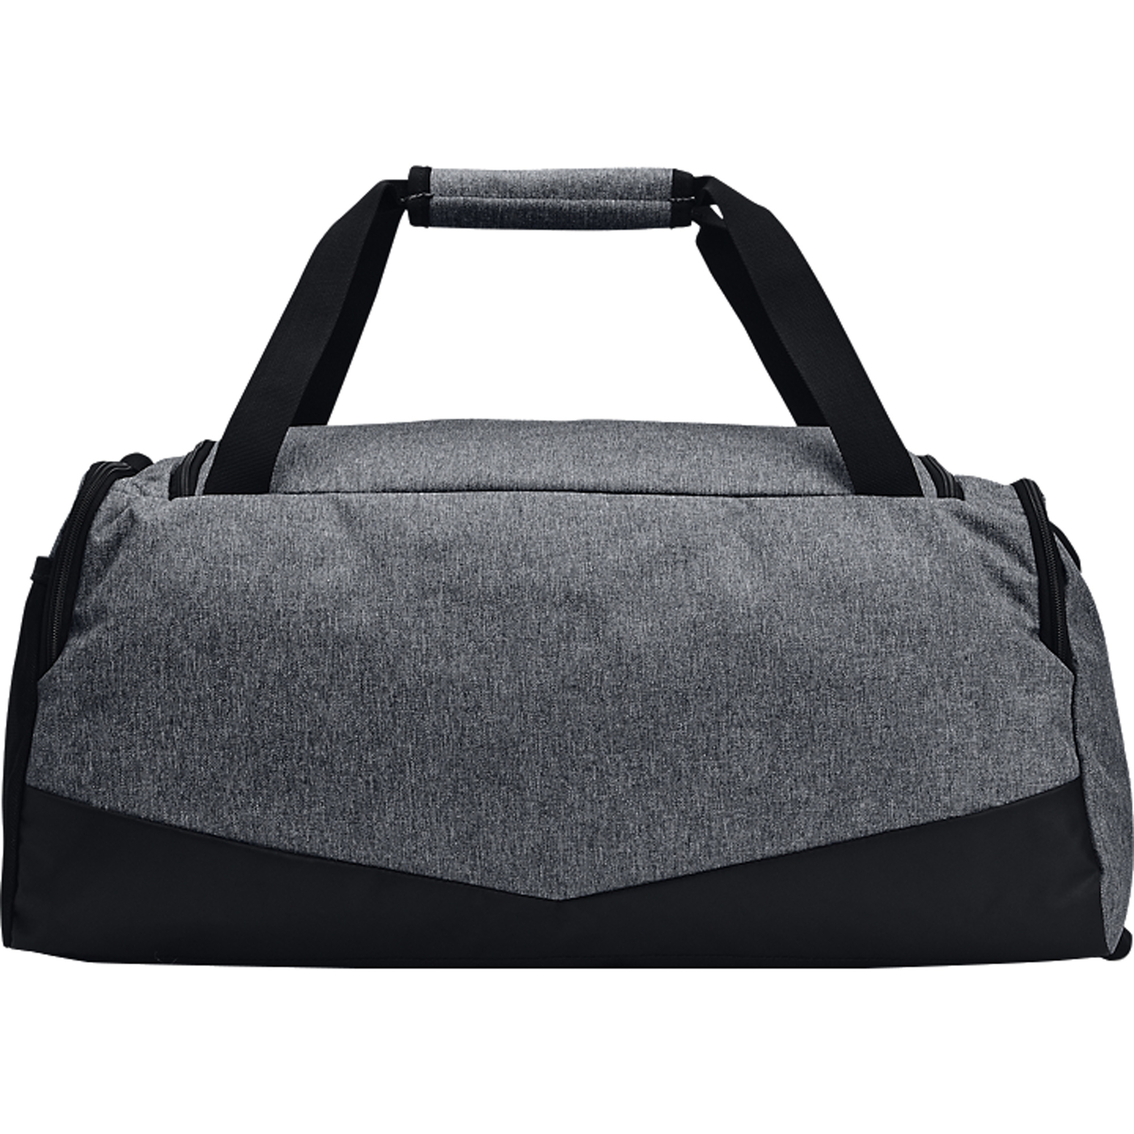 Under Armour Undeniable 5.0 Small Duffle Bag | Luggage | Clothing ...